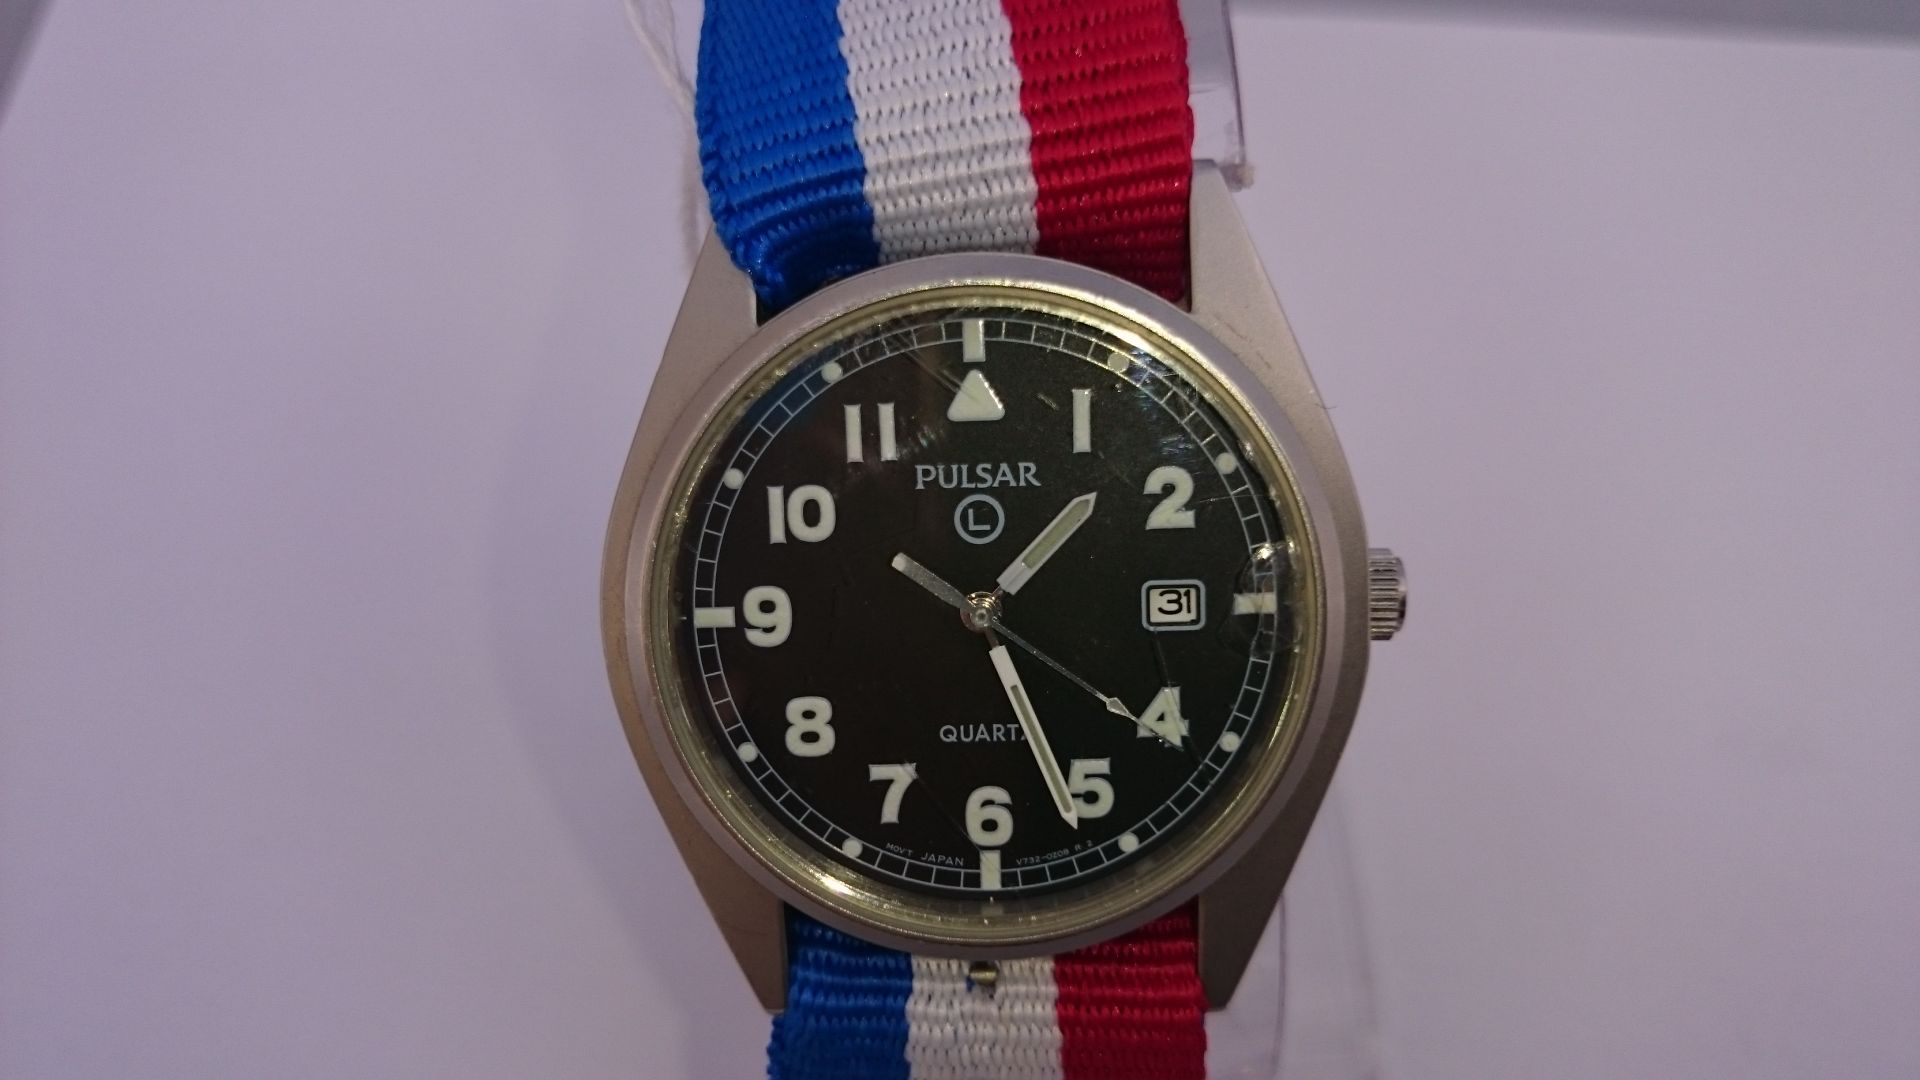 BRITISH ISSUED MILITARY G10 PULSAR WATCH WITH MILITARY STRAP,KEEPING TIME